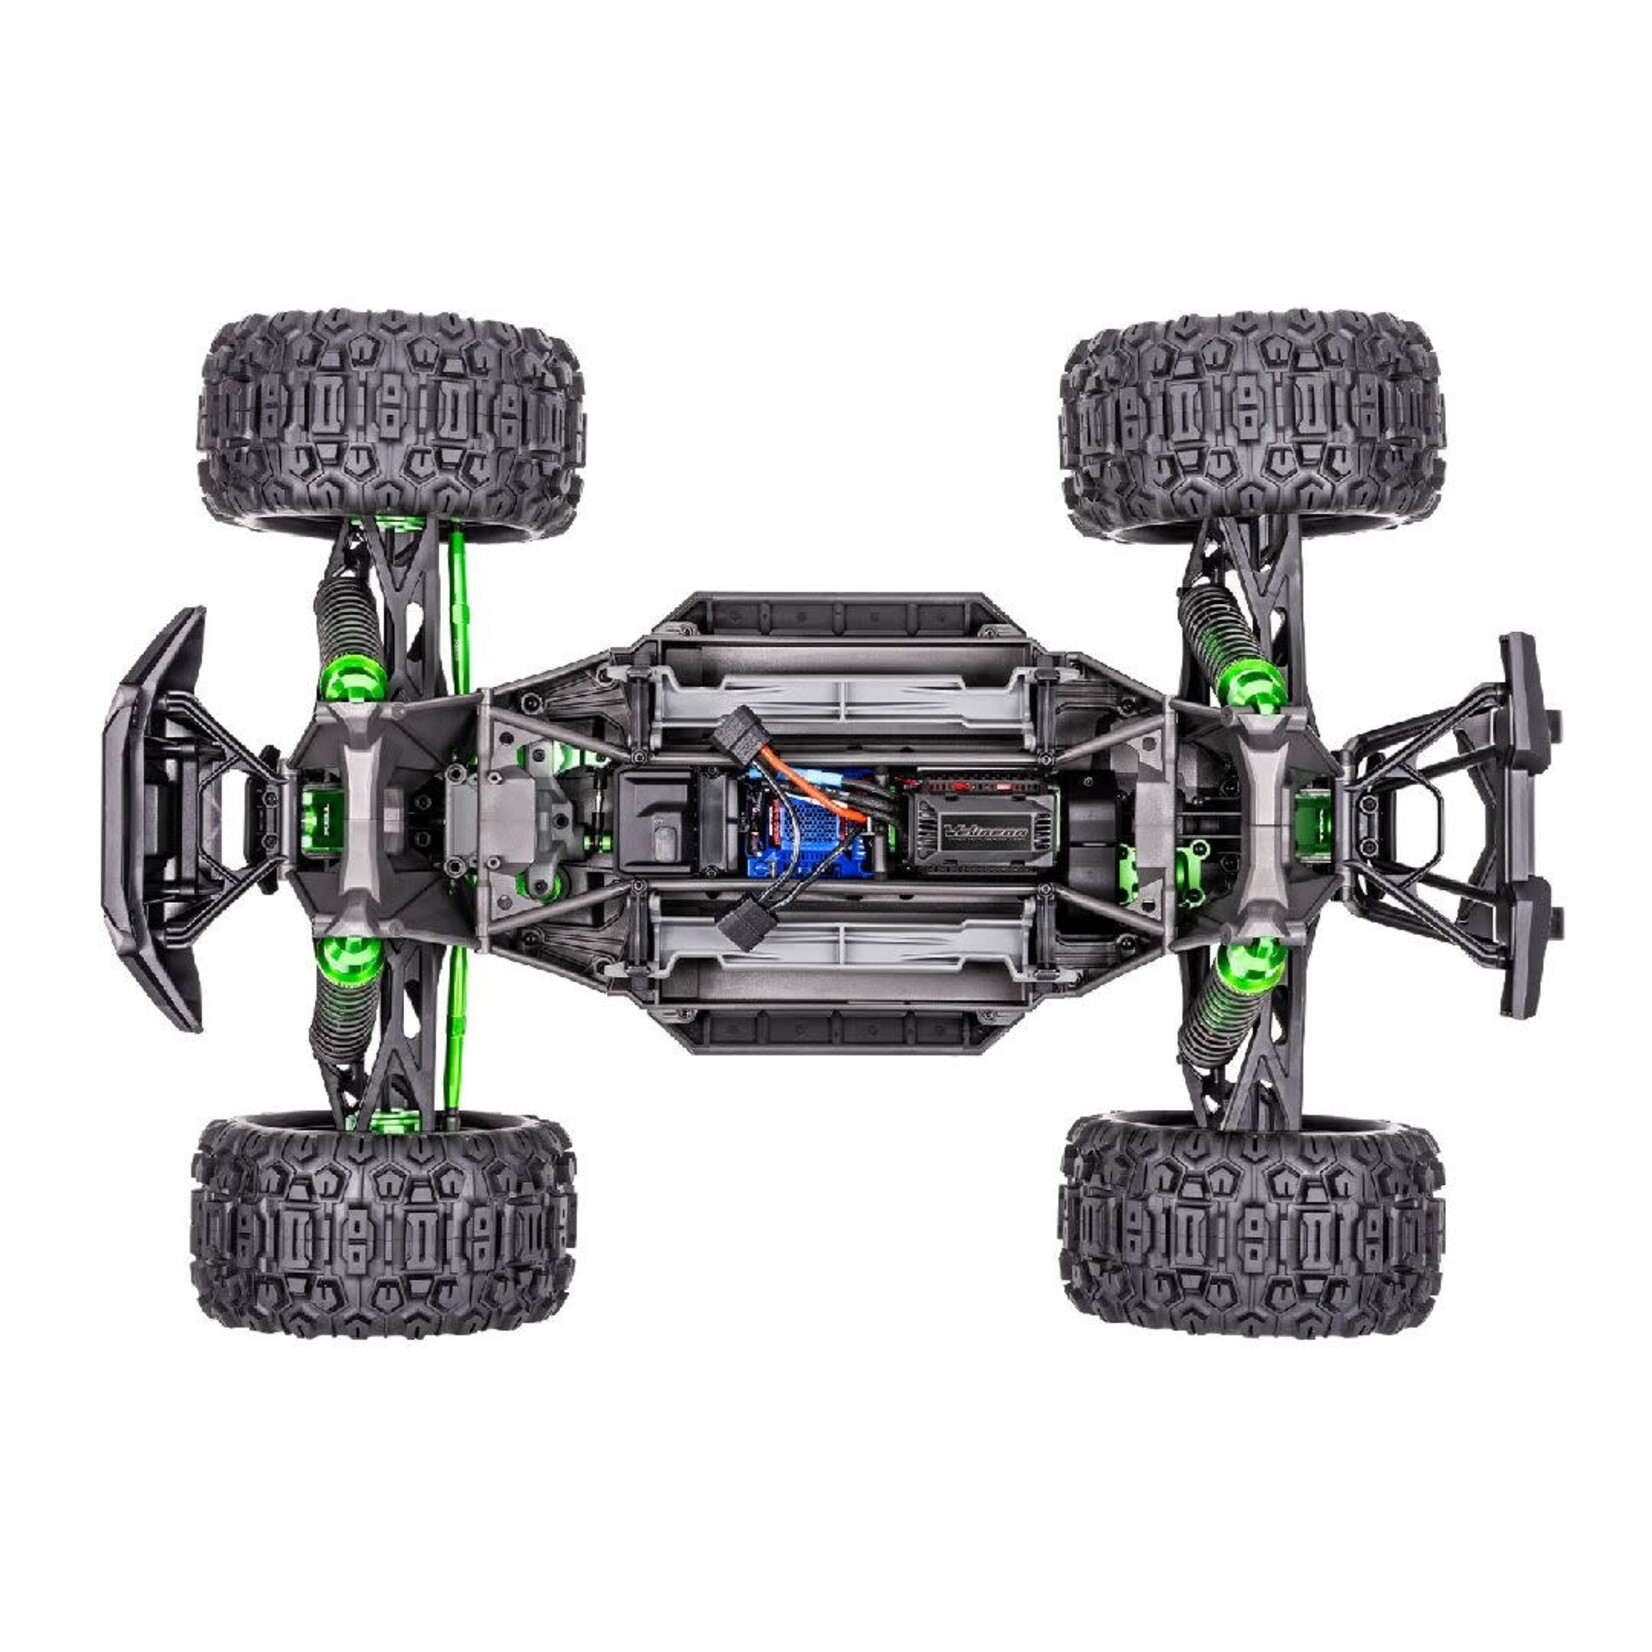 Traxxas 1/5 X-Maxx Ultimate 4WD Monster Truck Requires Batter and Charge - Green